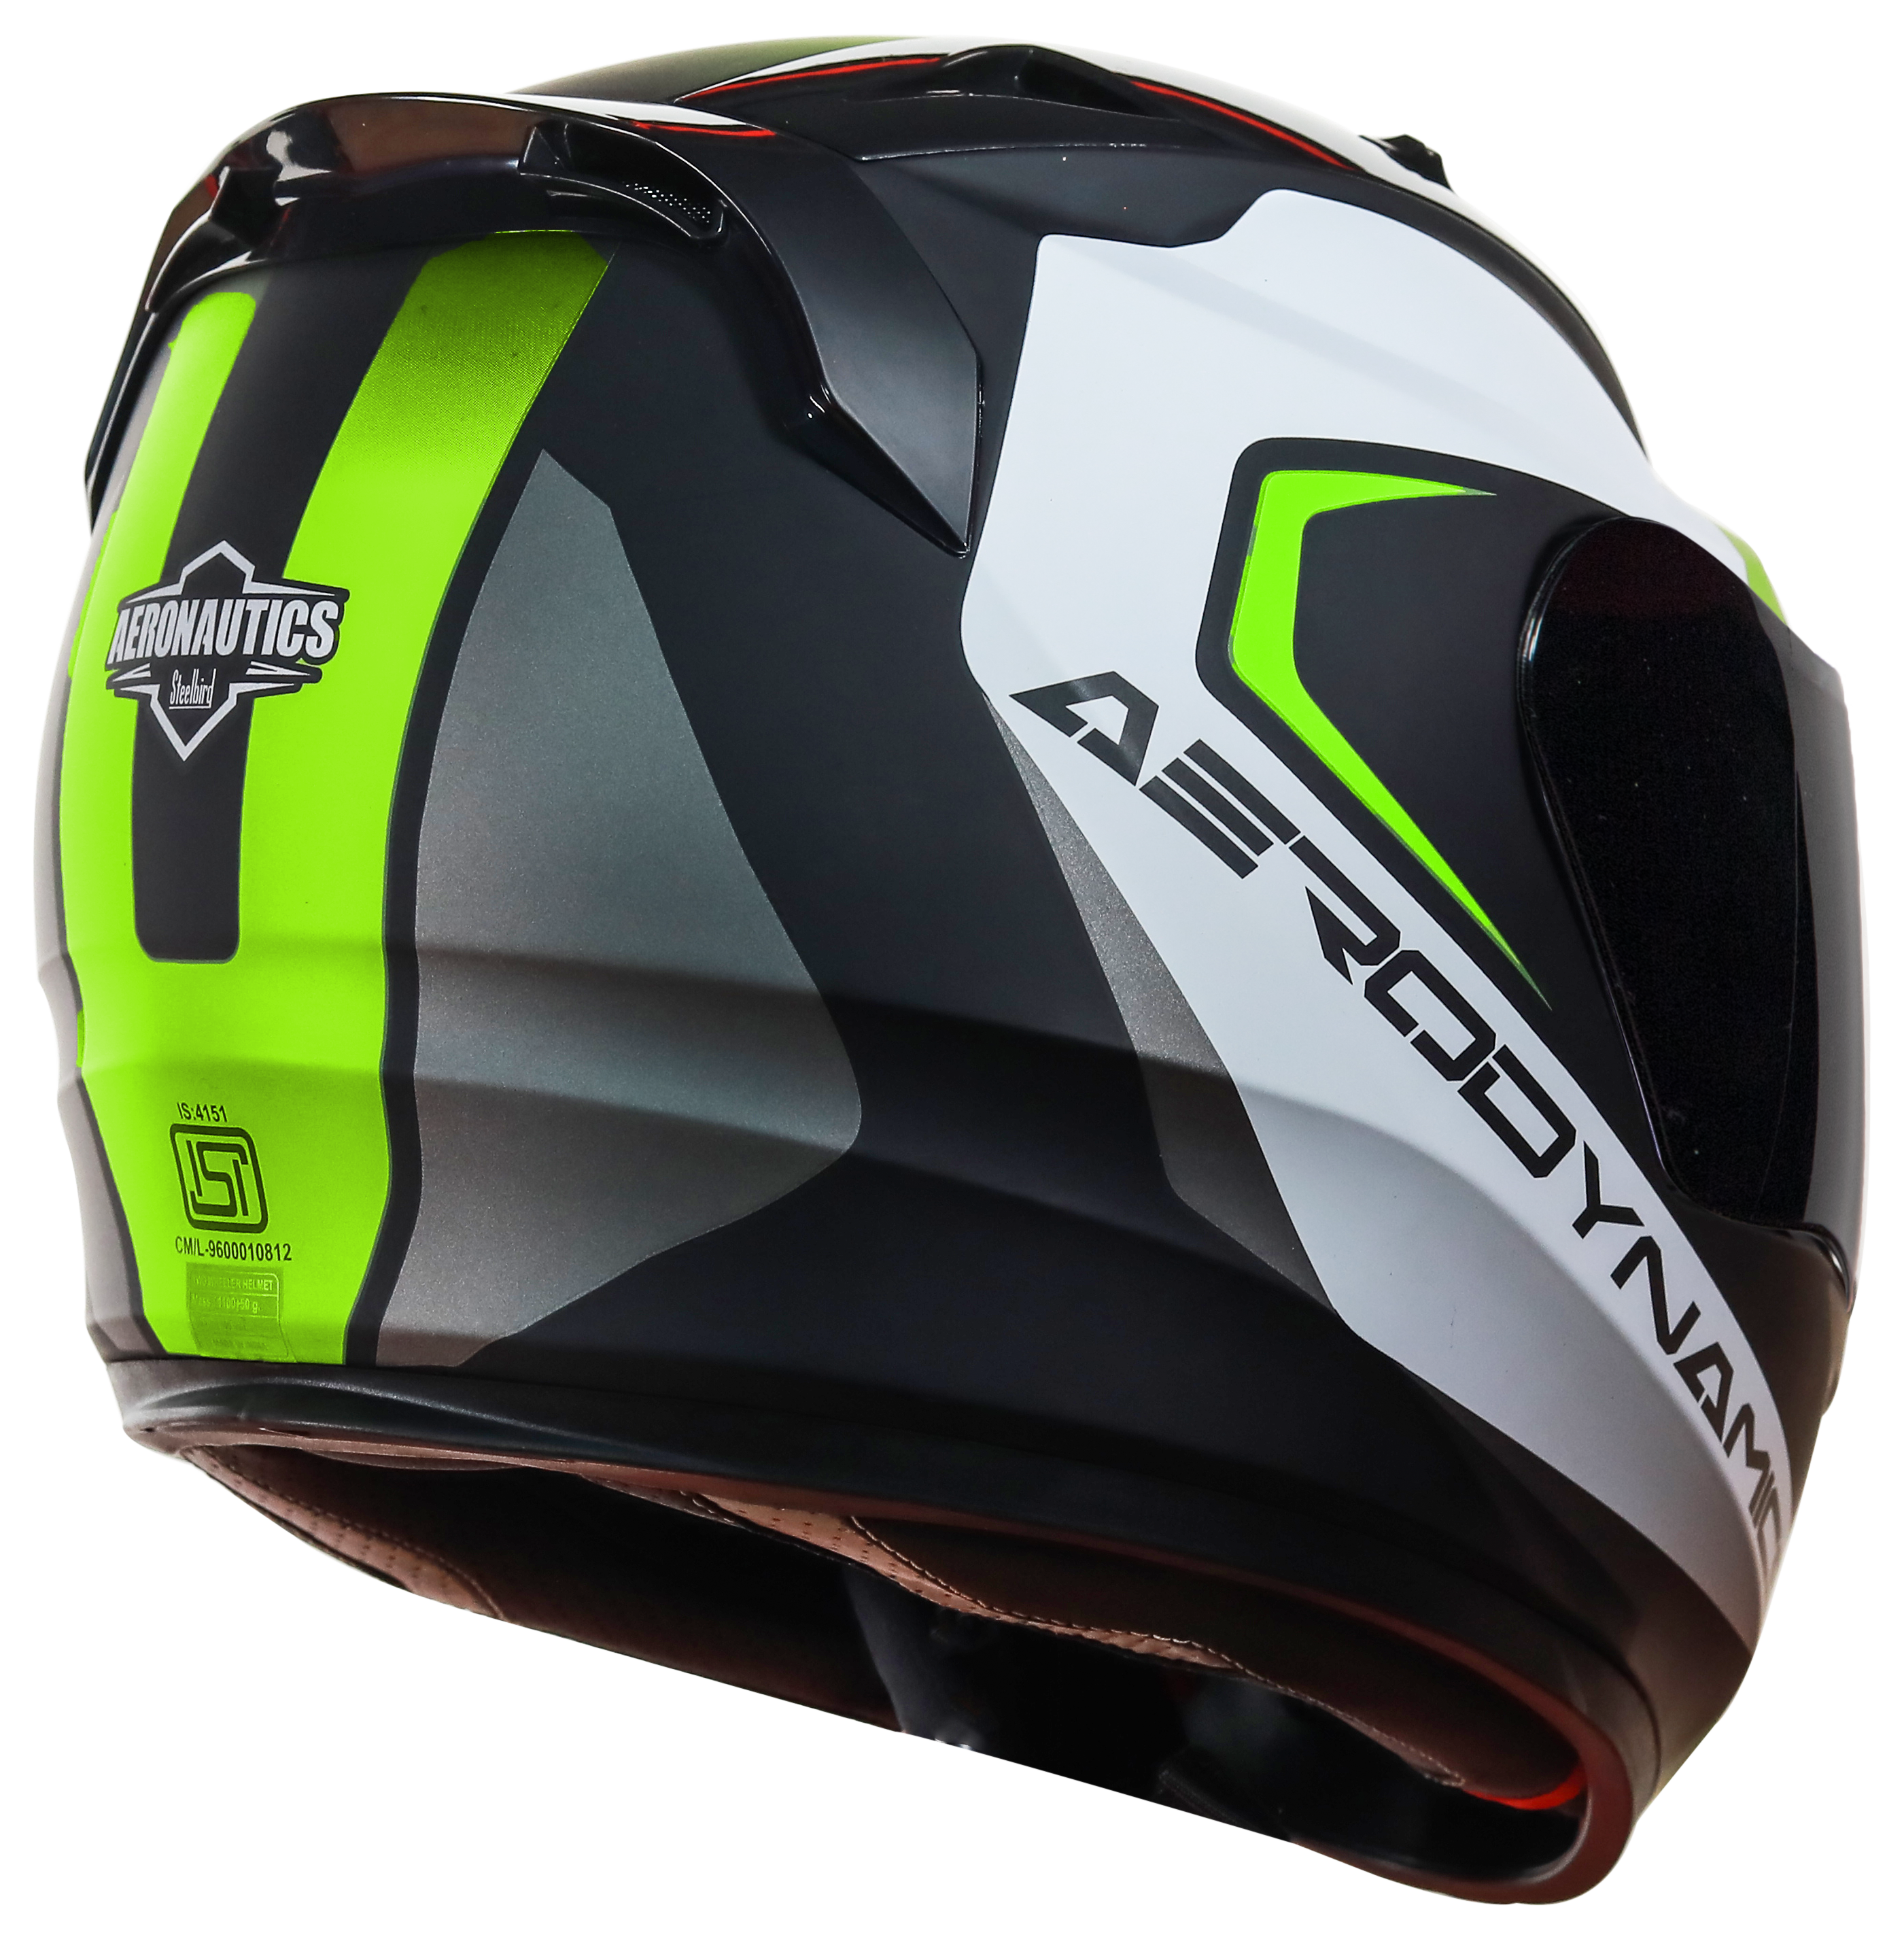 SA-1 Aerodynamics Mat Black With Neon(Fitted With Clear Visor Extra Gold Chrome Visor Free)